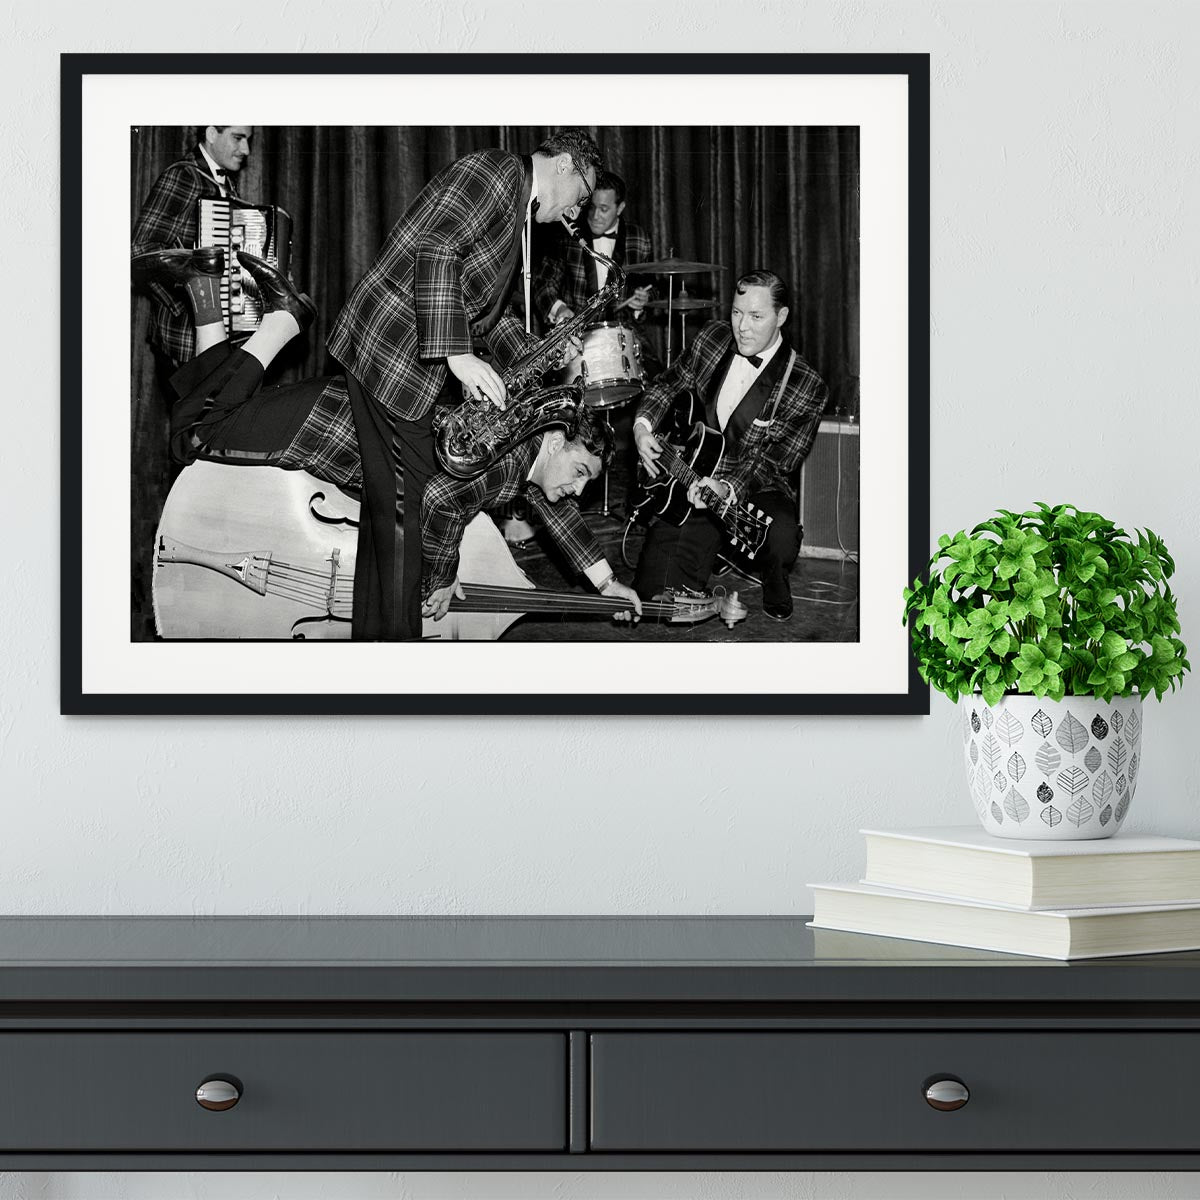 Bill Haley and The Comets going crazy Framed Print - Canvas Art Rocks - 1